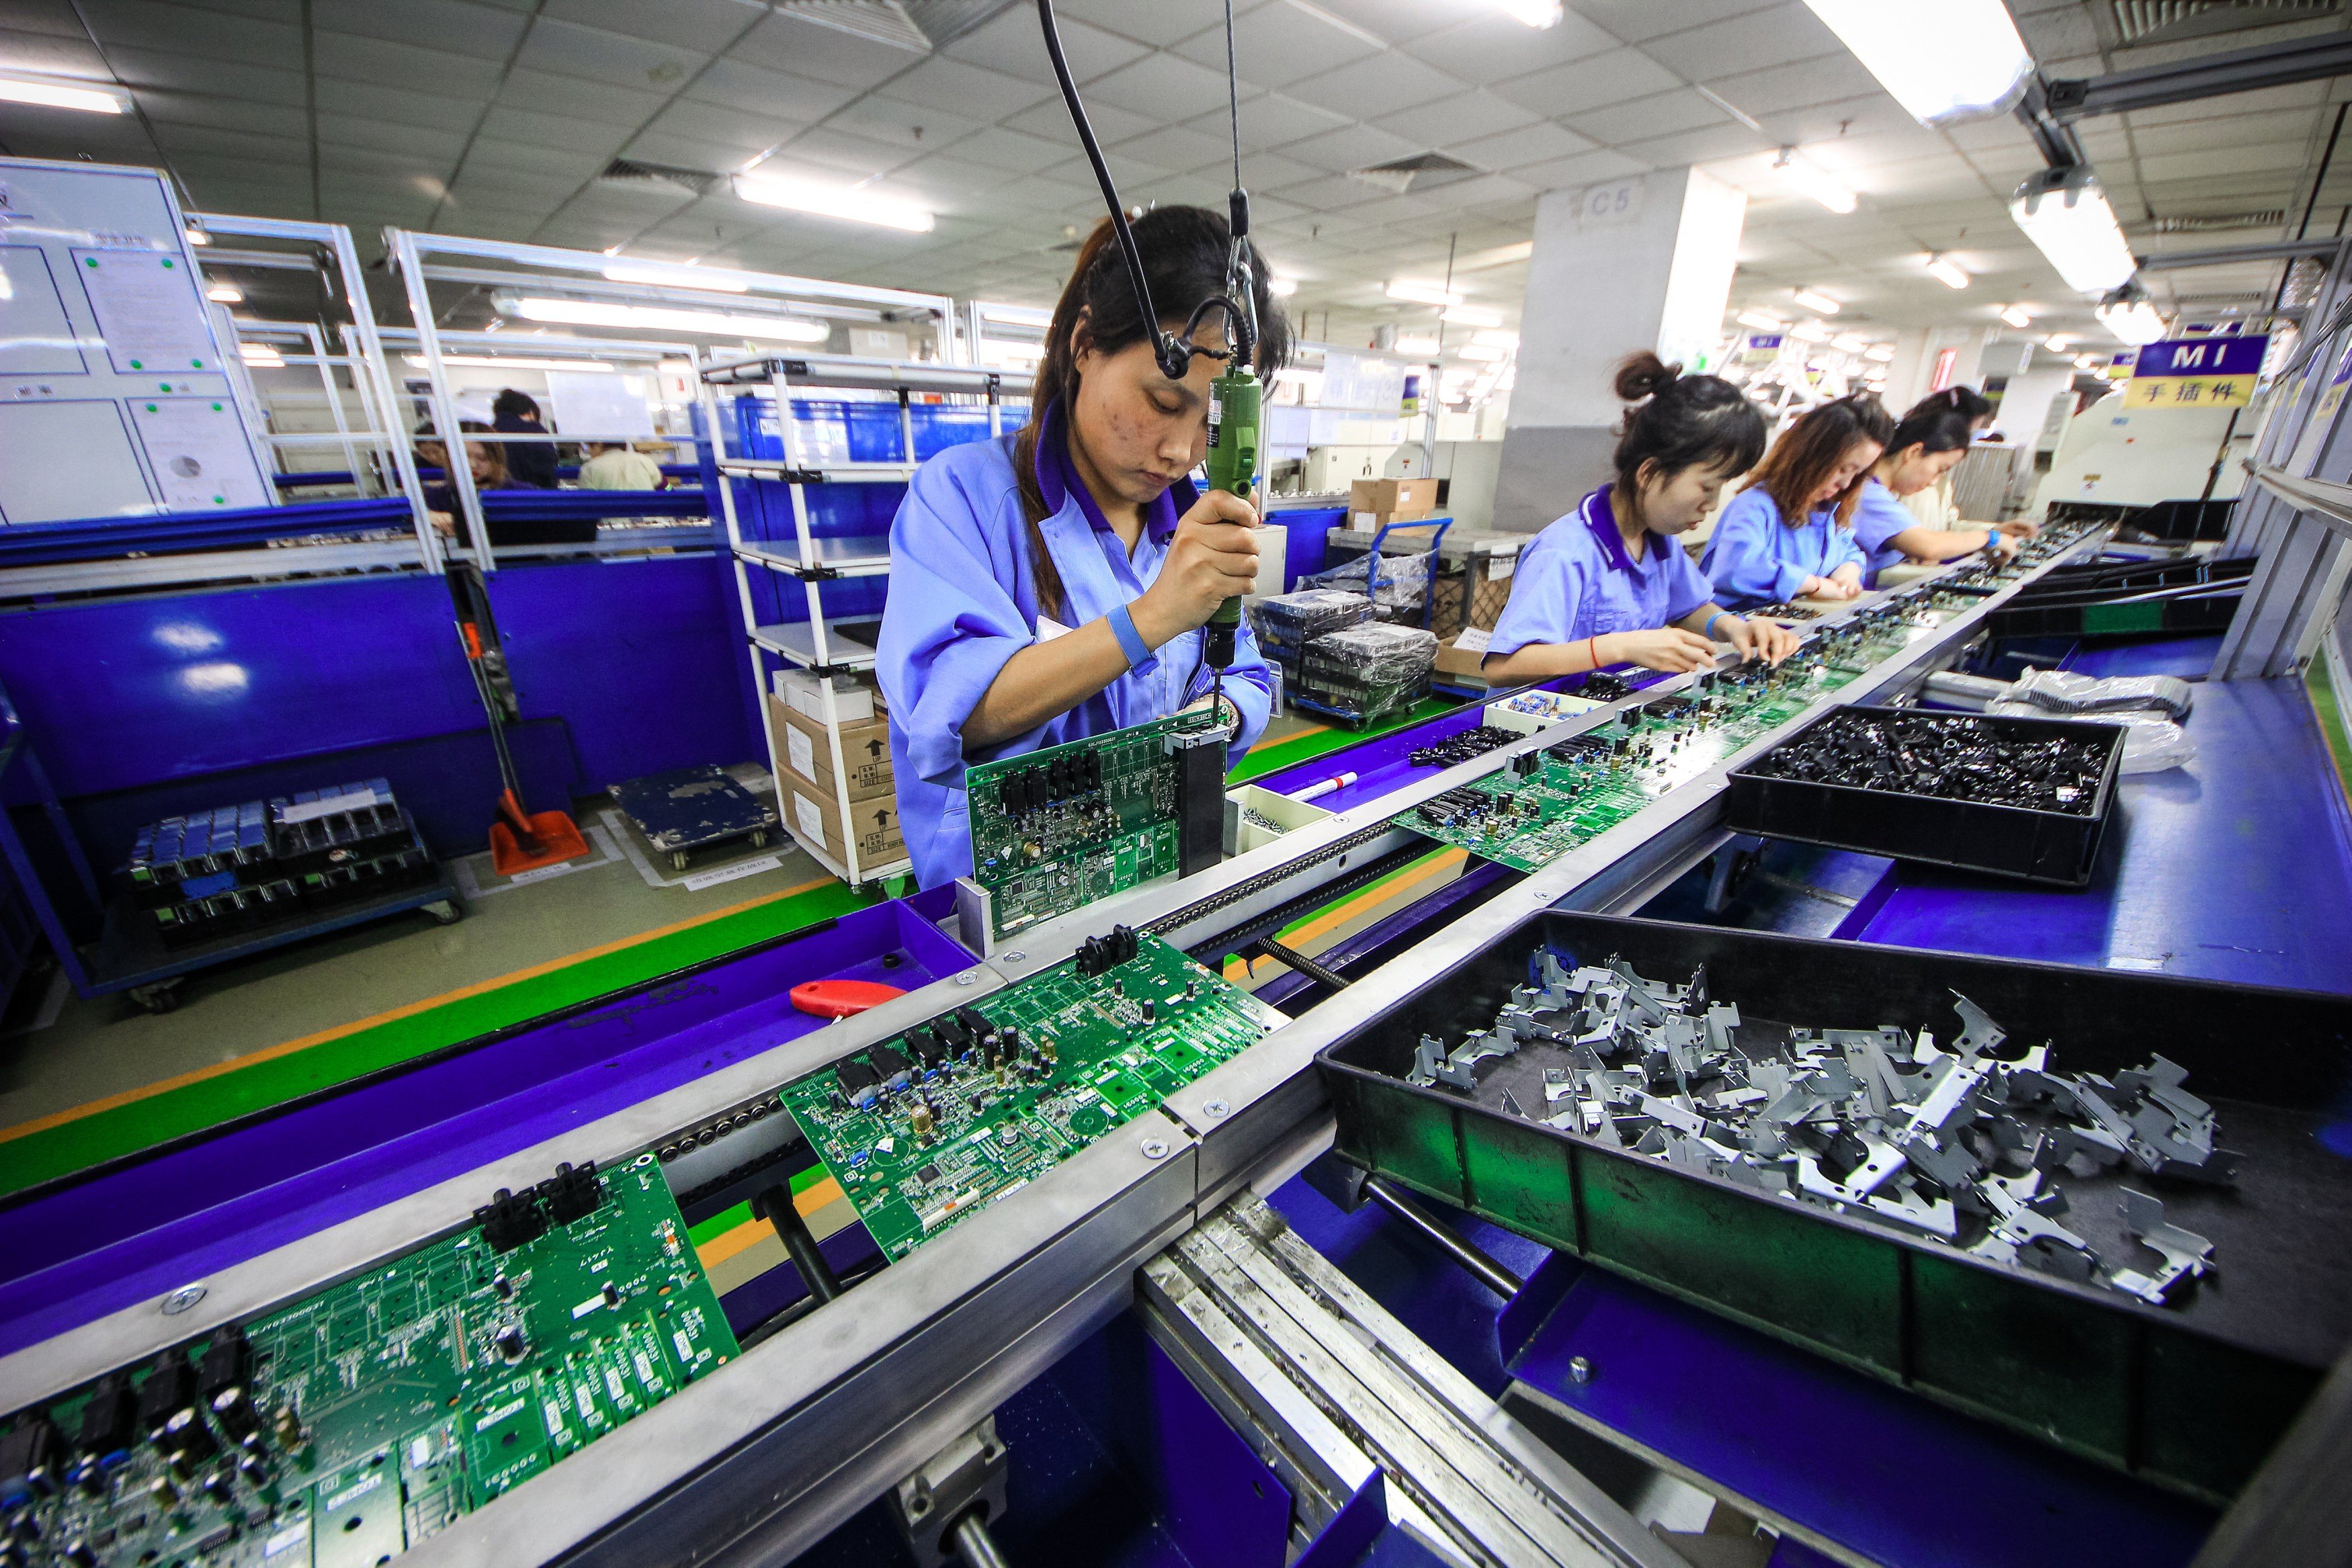 Workers at a production line manufacturing electronic keyboards in Tianjin, China. Photo: Reuters